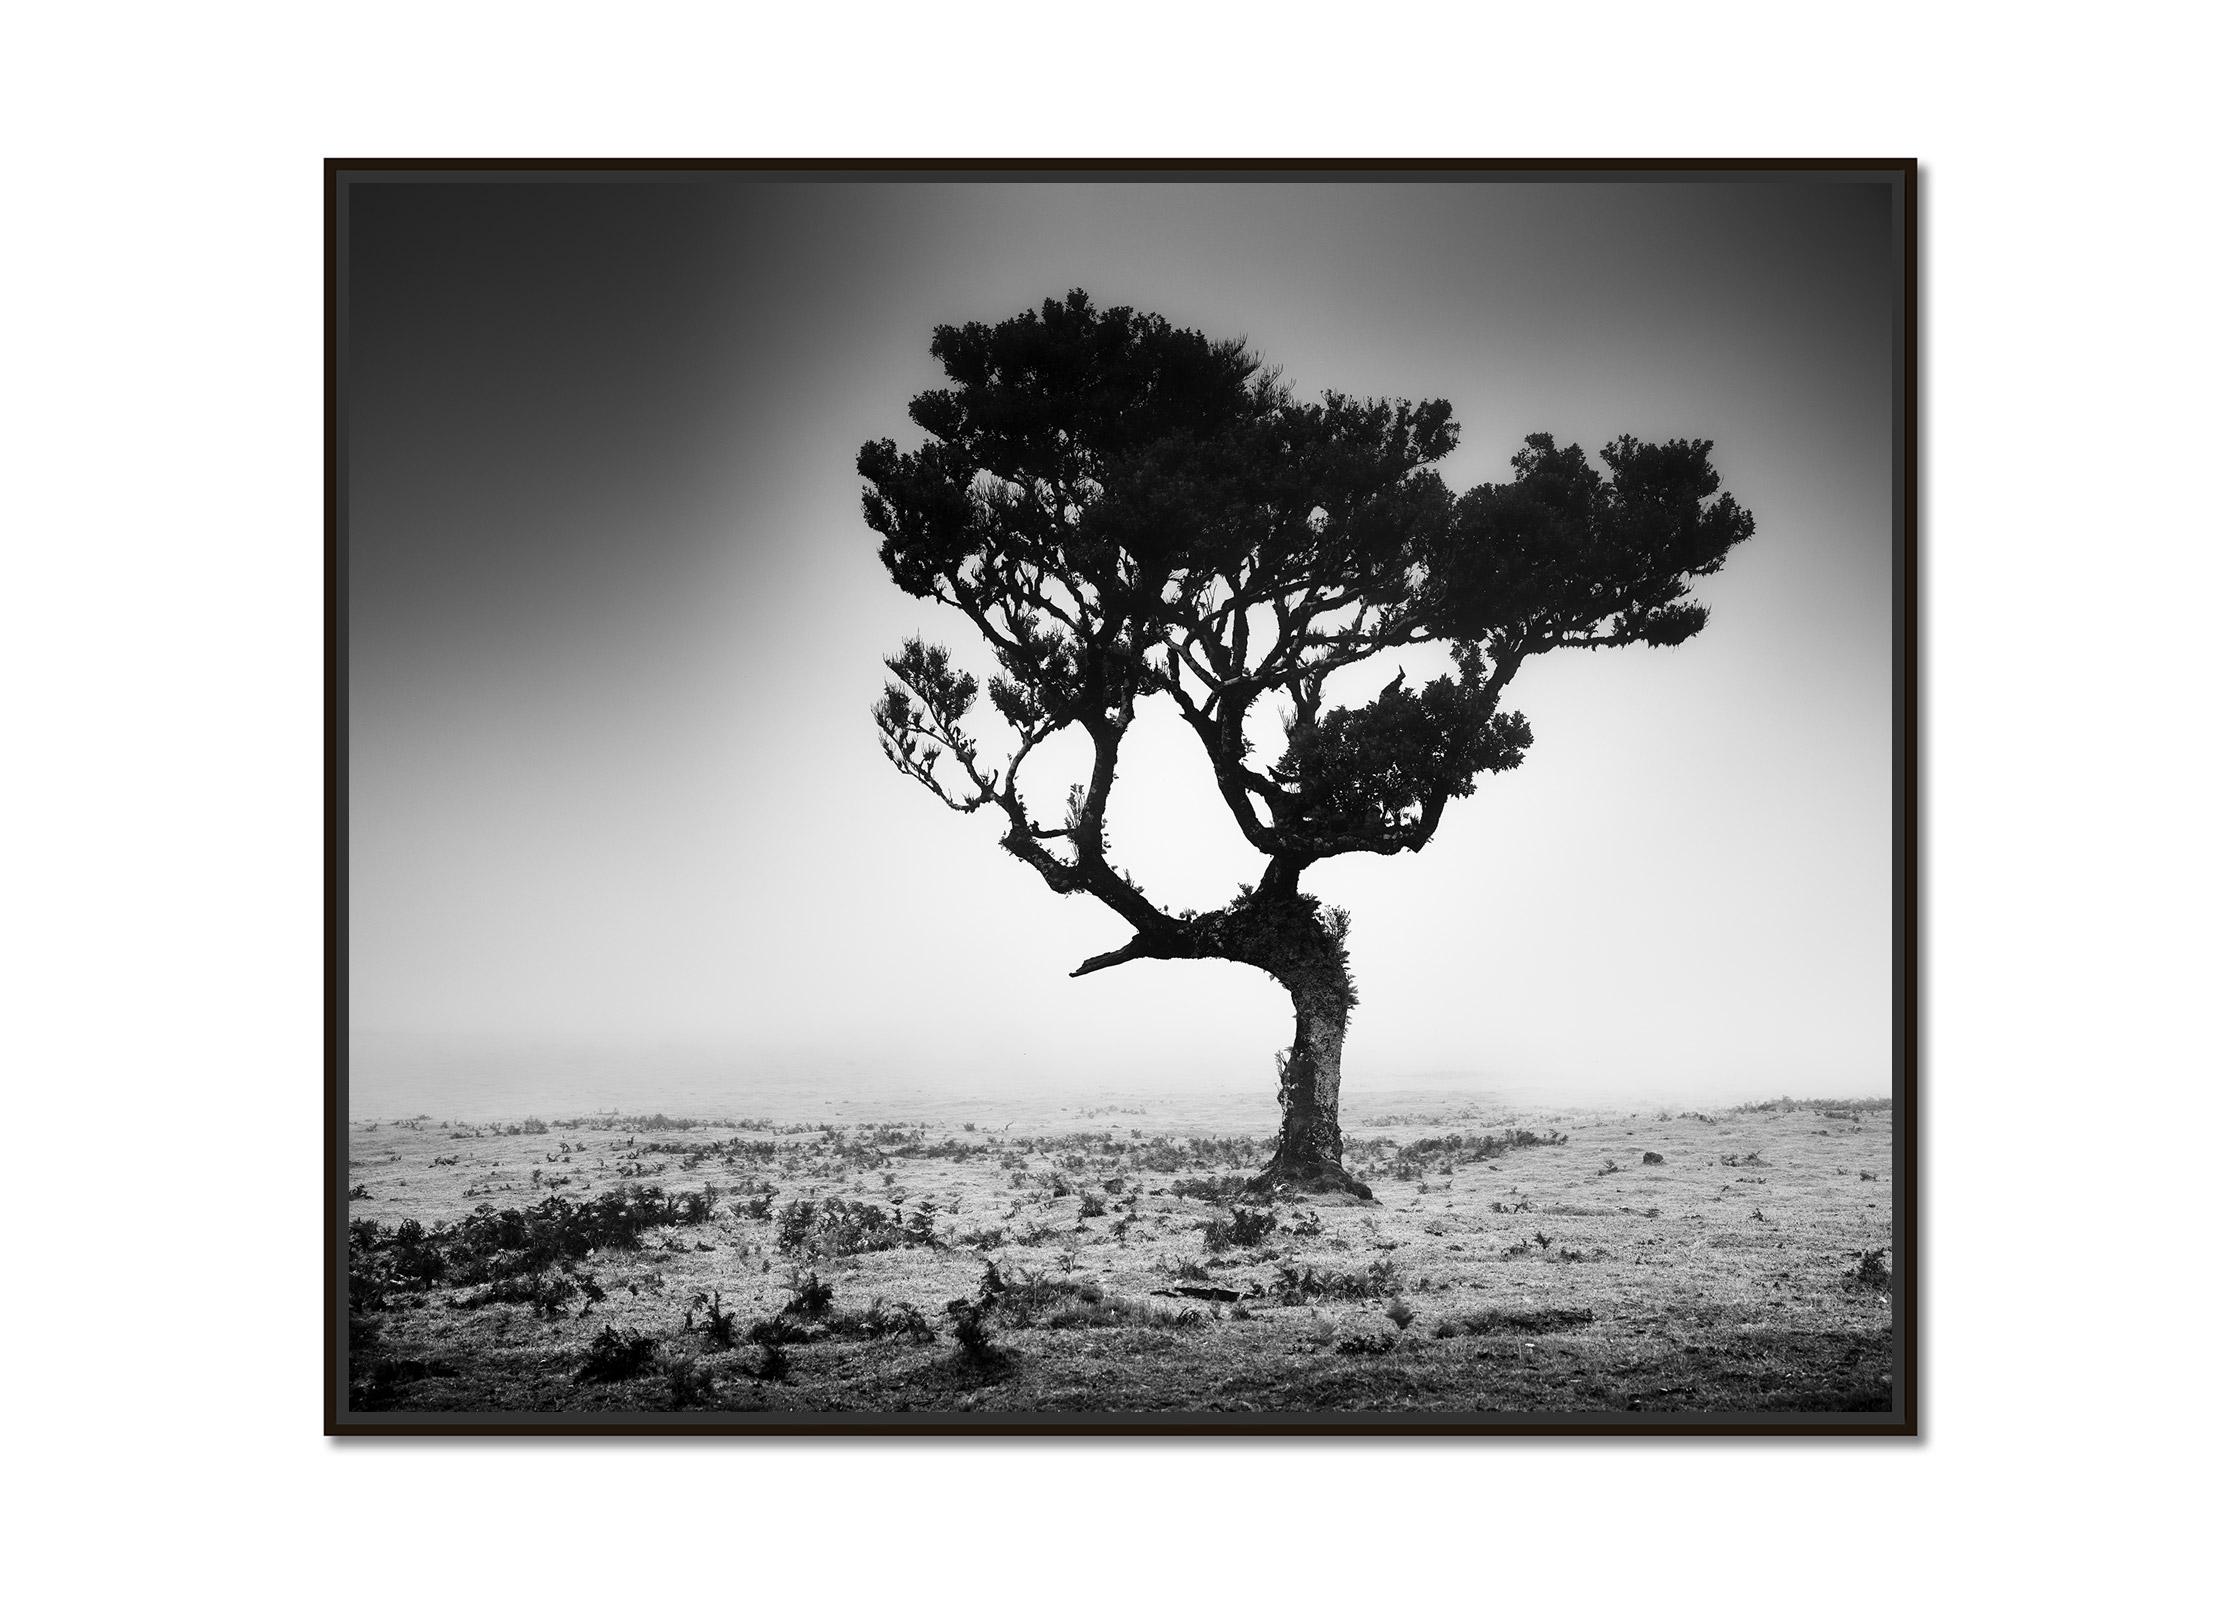 Mystical Tree, misty, Fanal, Madeira, black and white photography, landscape  - Photograph by Gerald Berghammer